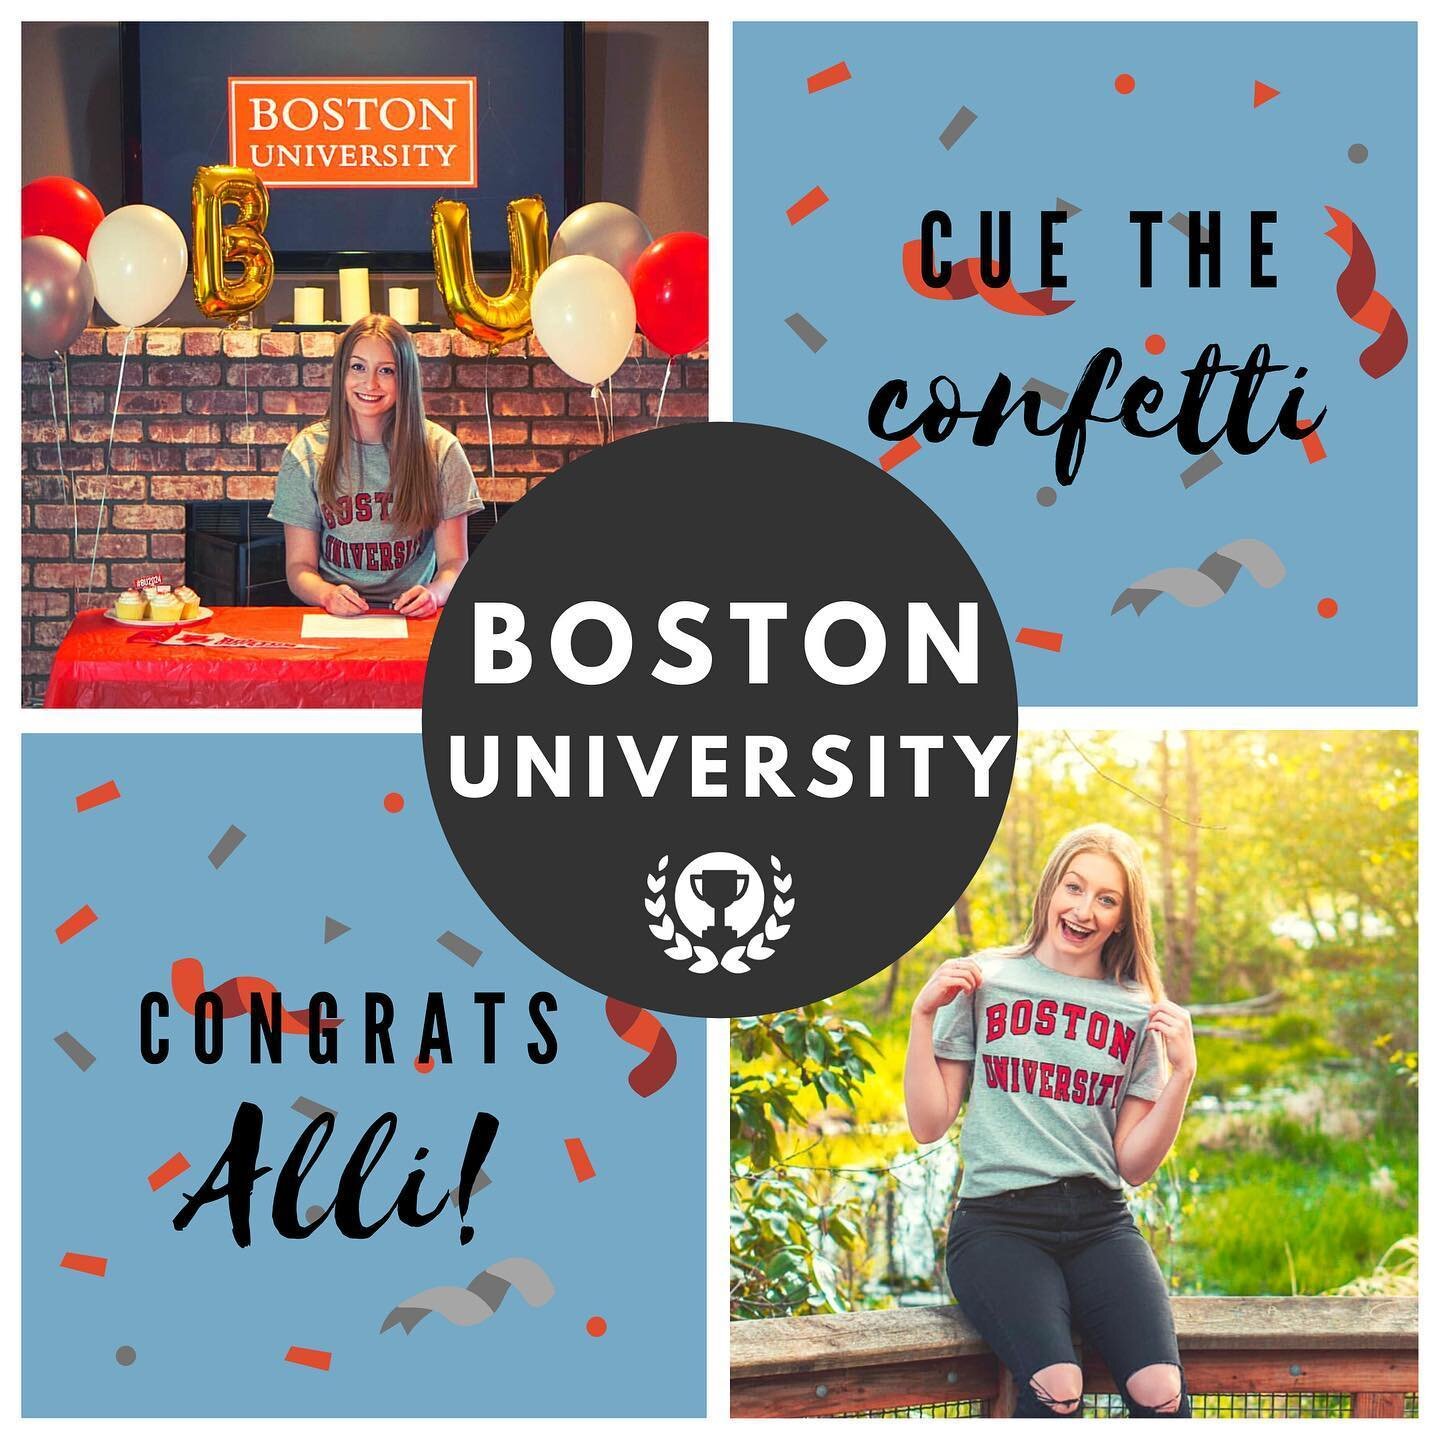 🎉Congratulations to @allilofquist on committing to Boston University! 🏆
.
Keep bringing that positive energy and attitude in Boston! We can&rsquo;t wait to see all that you accomplish in this next phase of your athletic and academic career! .
#cong